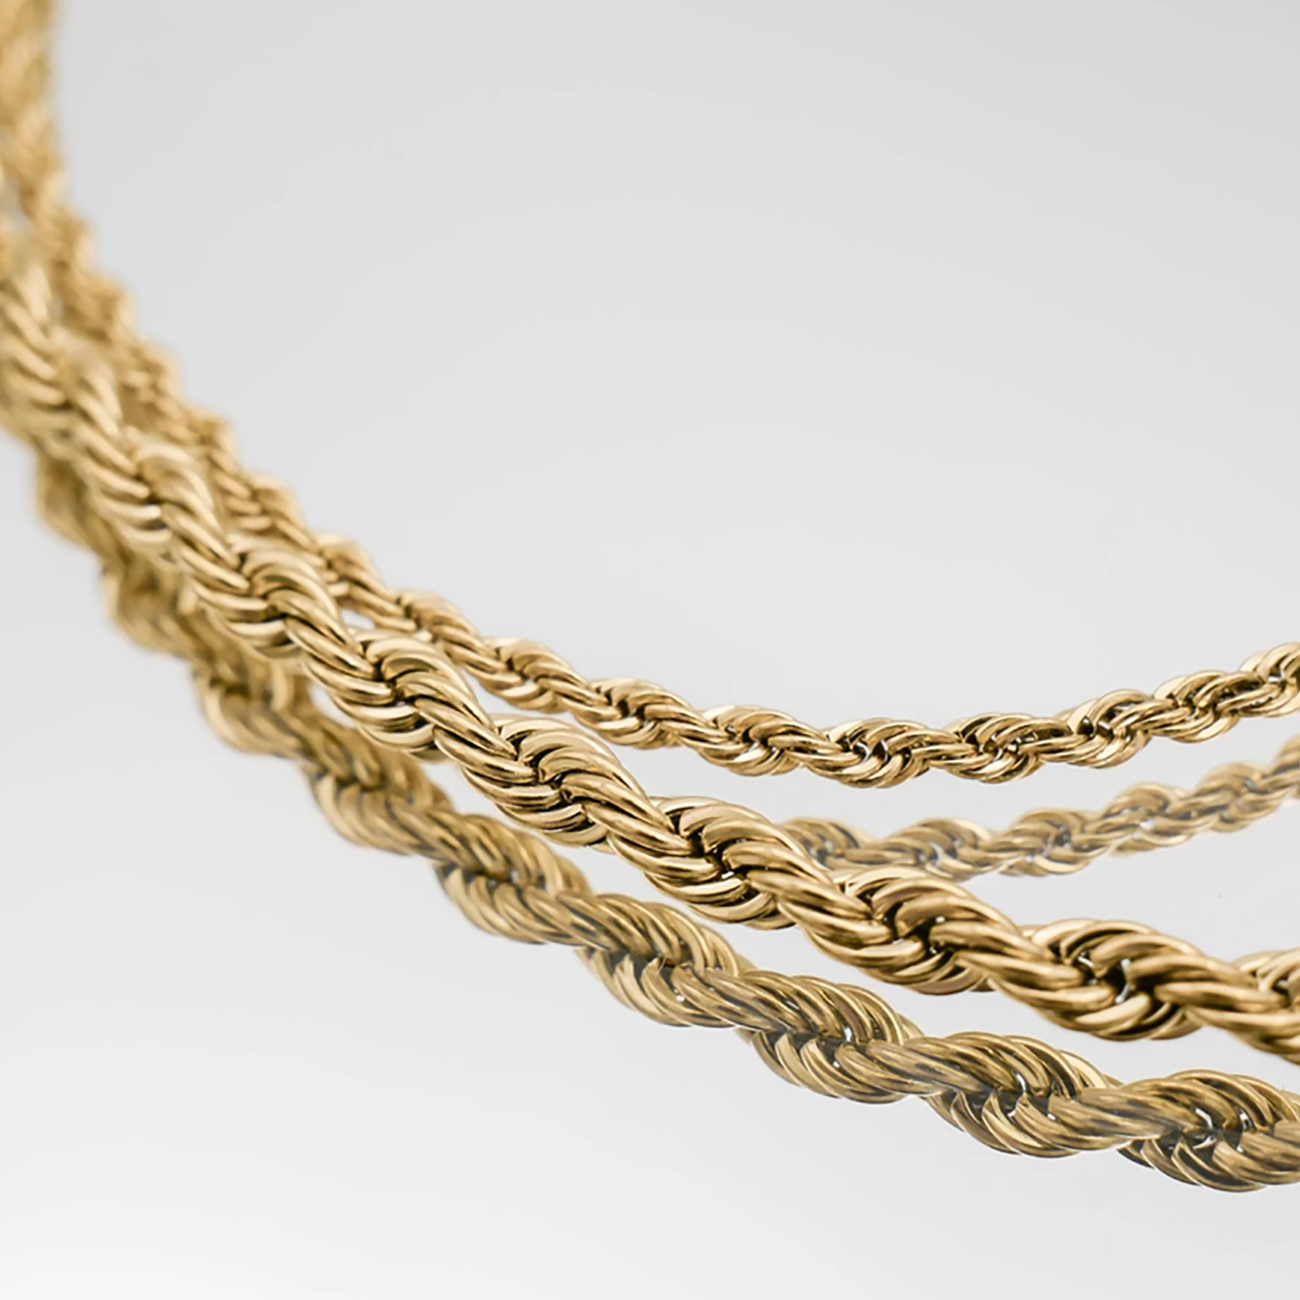 54 FLORAL 3mm SNAKE ROPE NECKLACE CHAIN - GOLD - 54 Floral